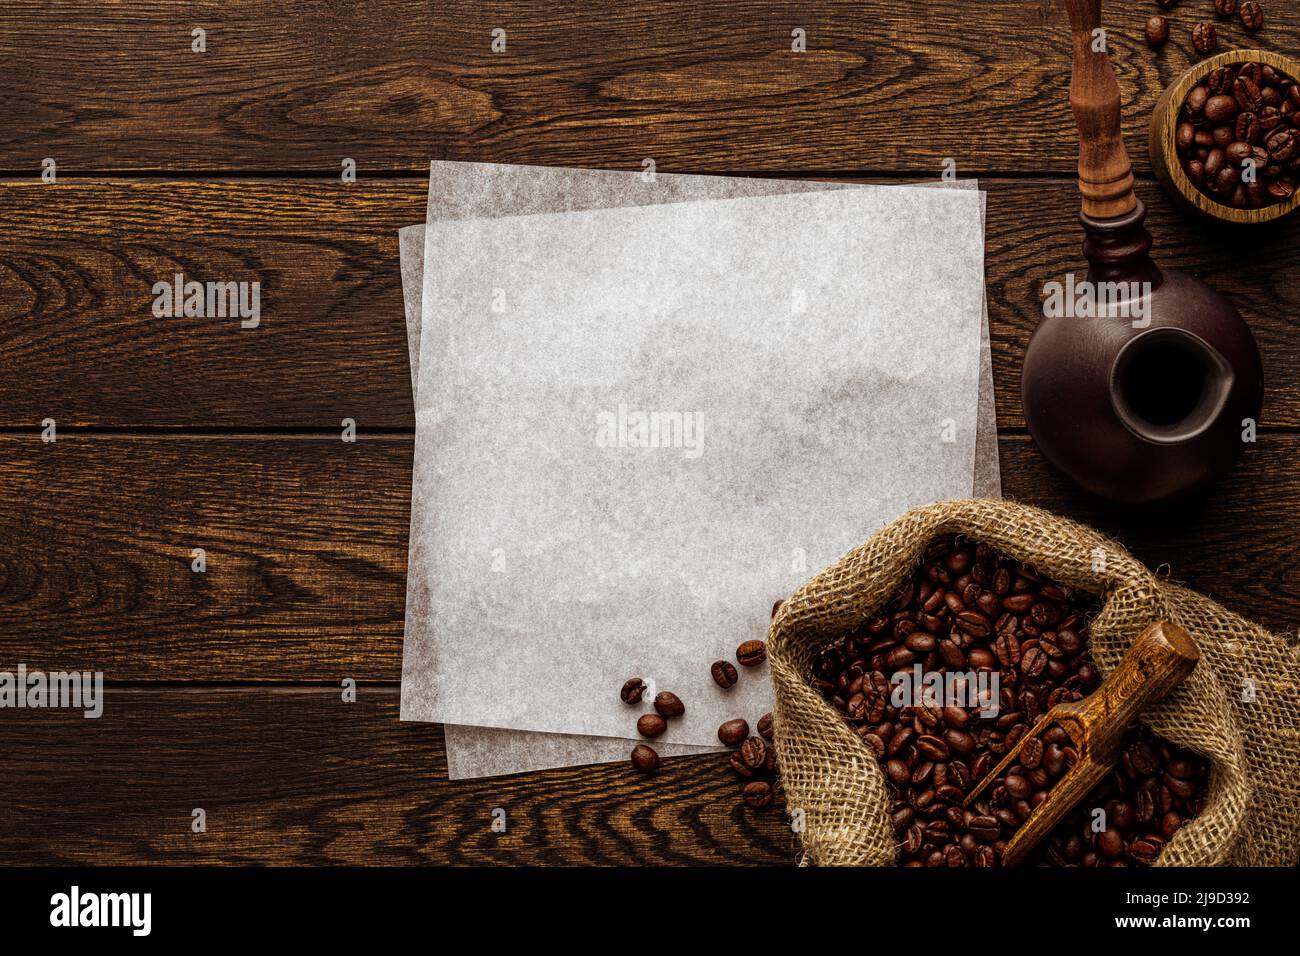 Freshly roasted coffee beans. Wooden background with hot aromatic drink preparation accessories and packing craft paper sheets. Turkish cezve pot, woo Stock Photo